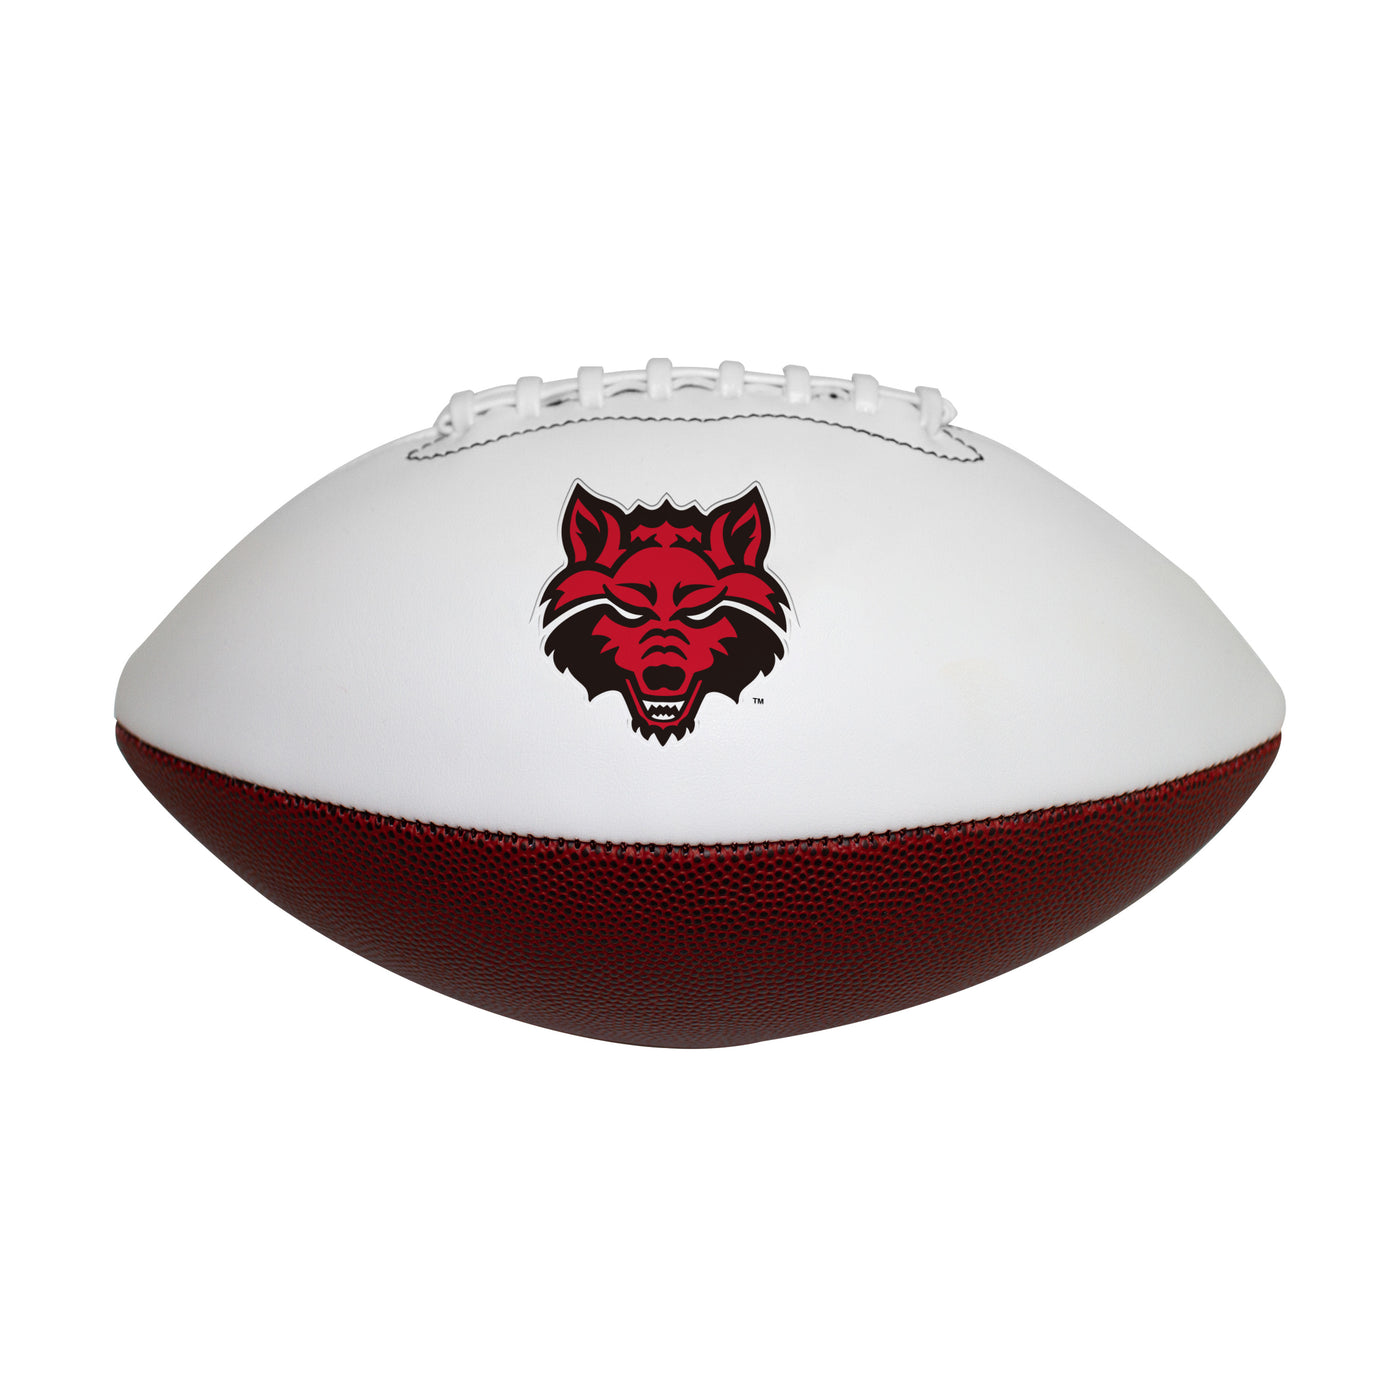 Arkansas State Official-Size Autograph Football